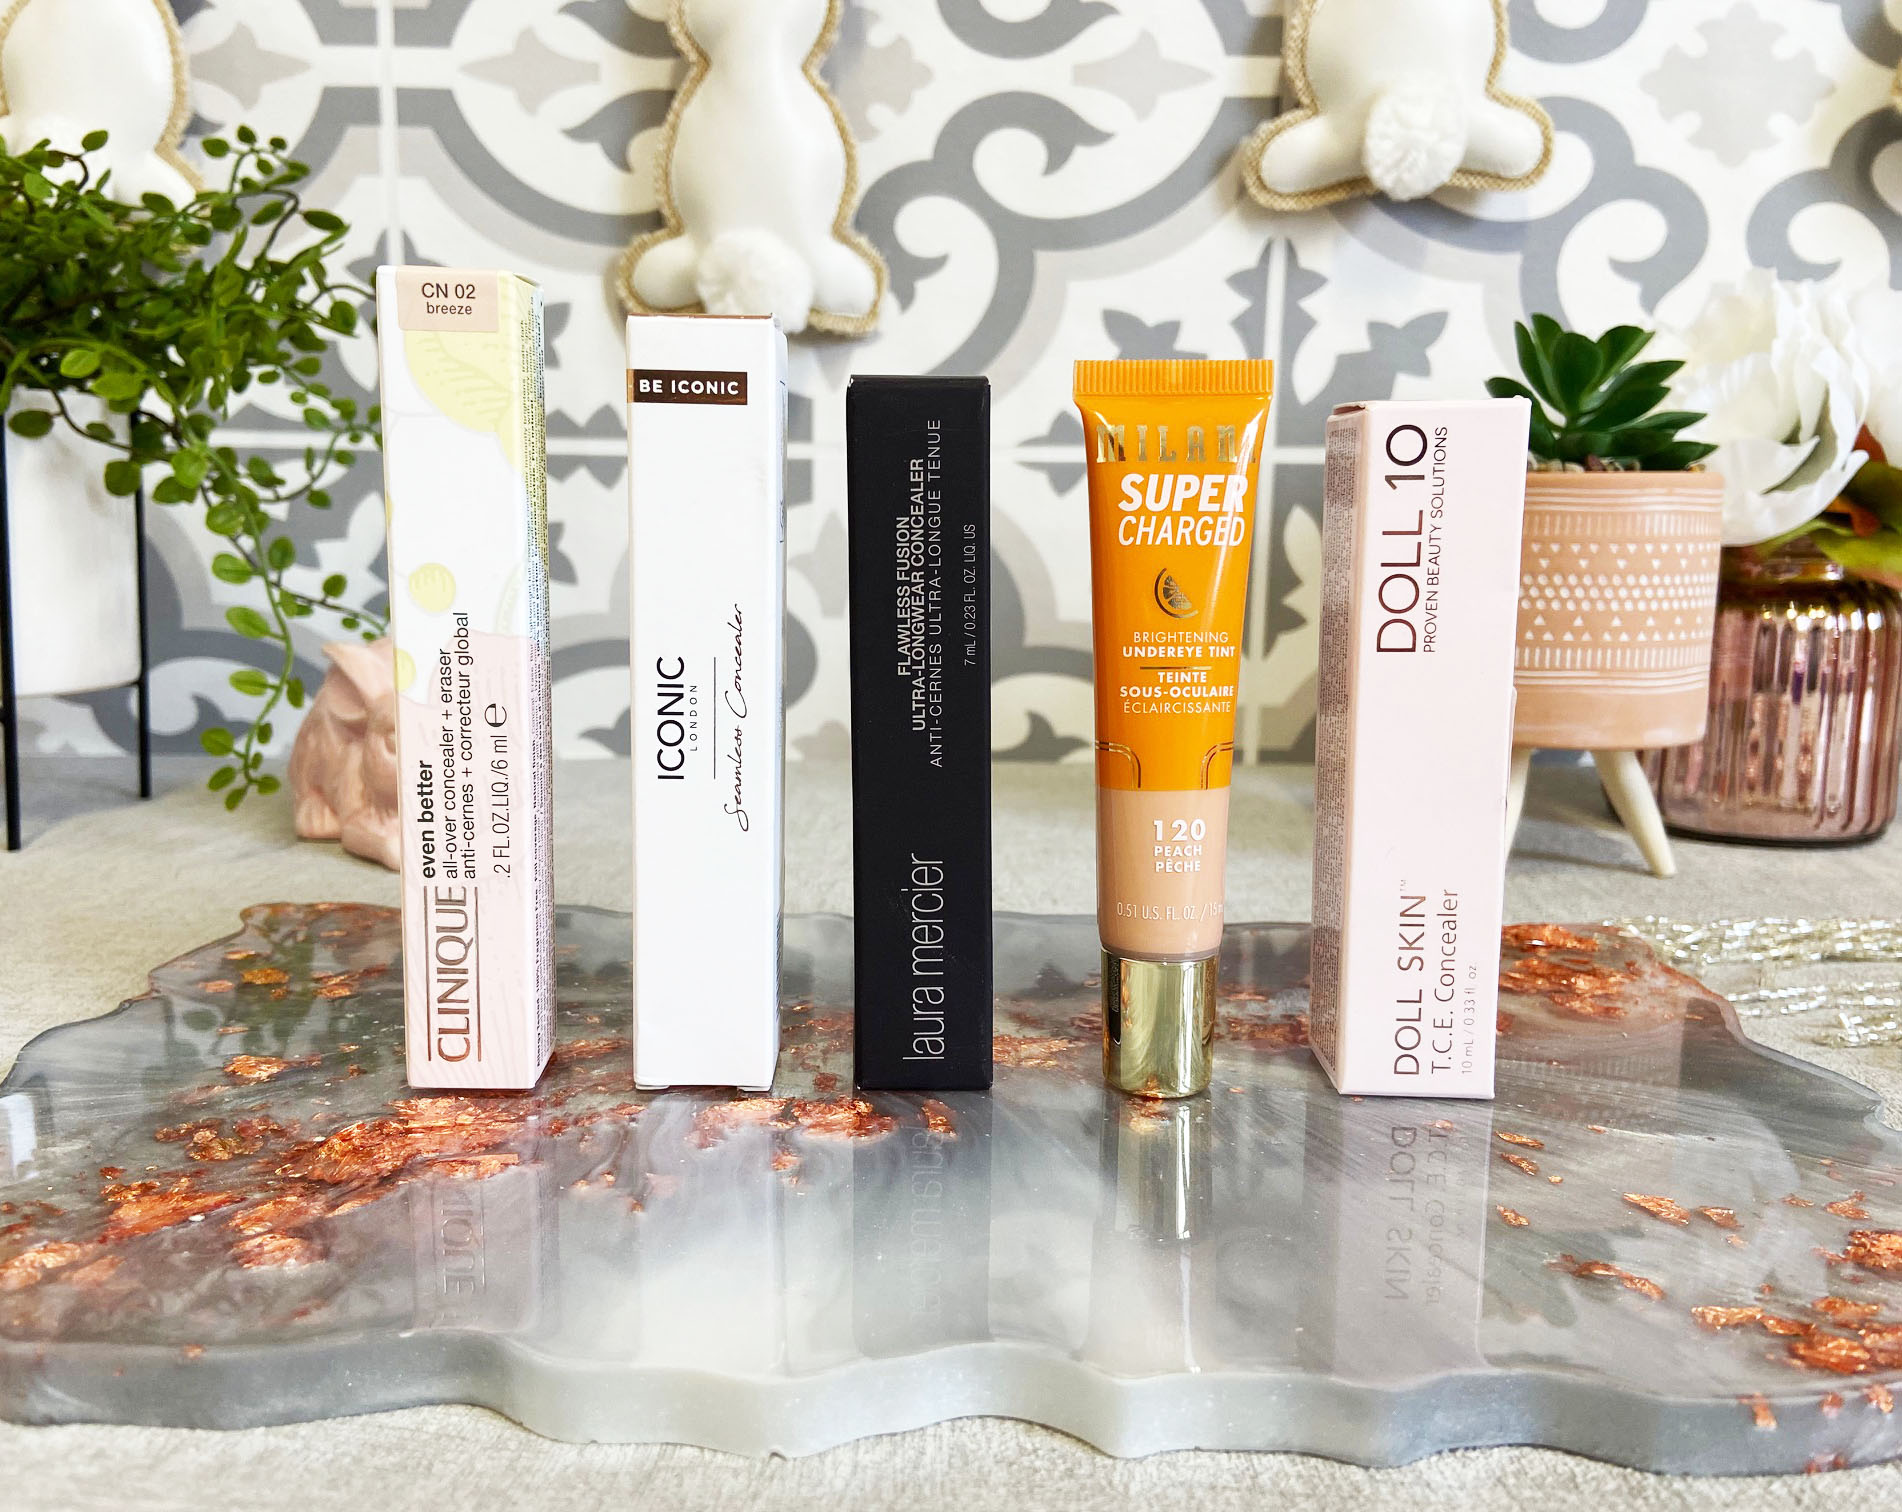 Trying Five Concealers - Even Better Concealer, Iconic London Seamless Concealer, Laura Mercier Flawless Concealer, Milani Supercharged Undereye Tint & 10 Doll Skin TCE Concealer | Kathryn's Loves